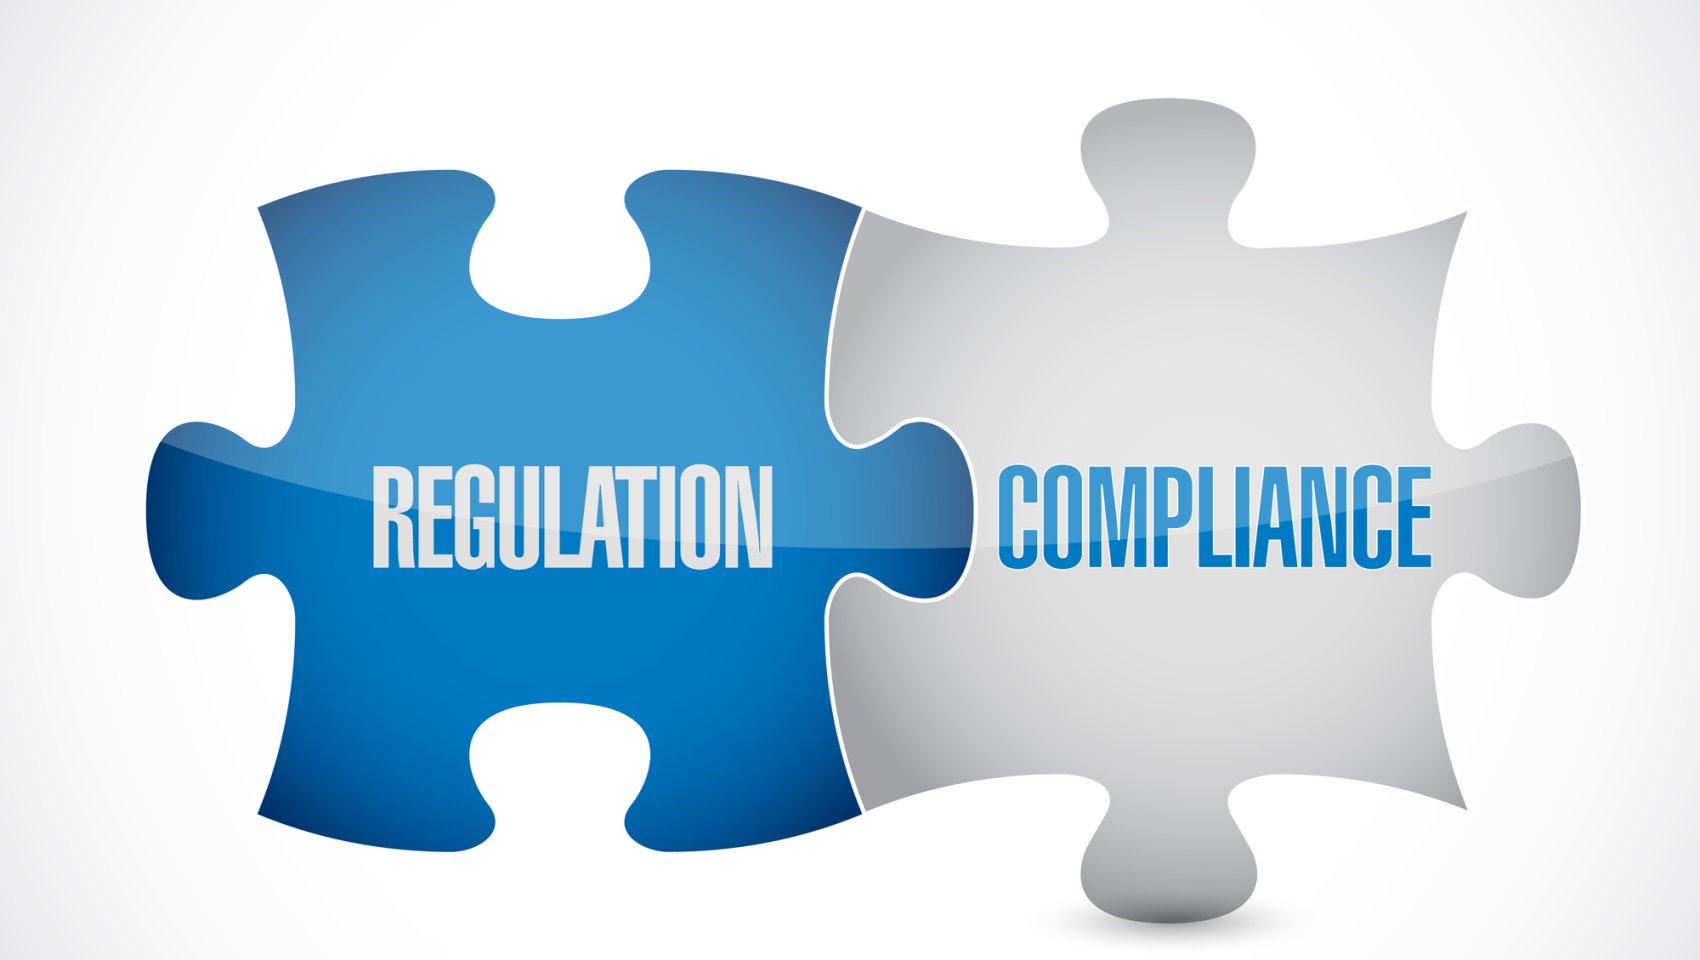 Regulation and compliance puzzle pieces